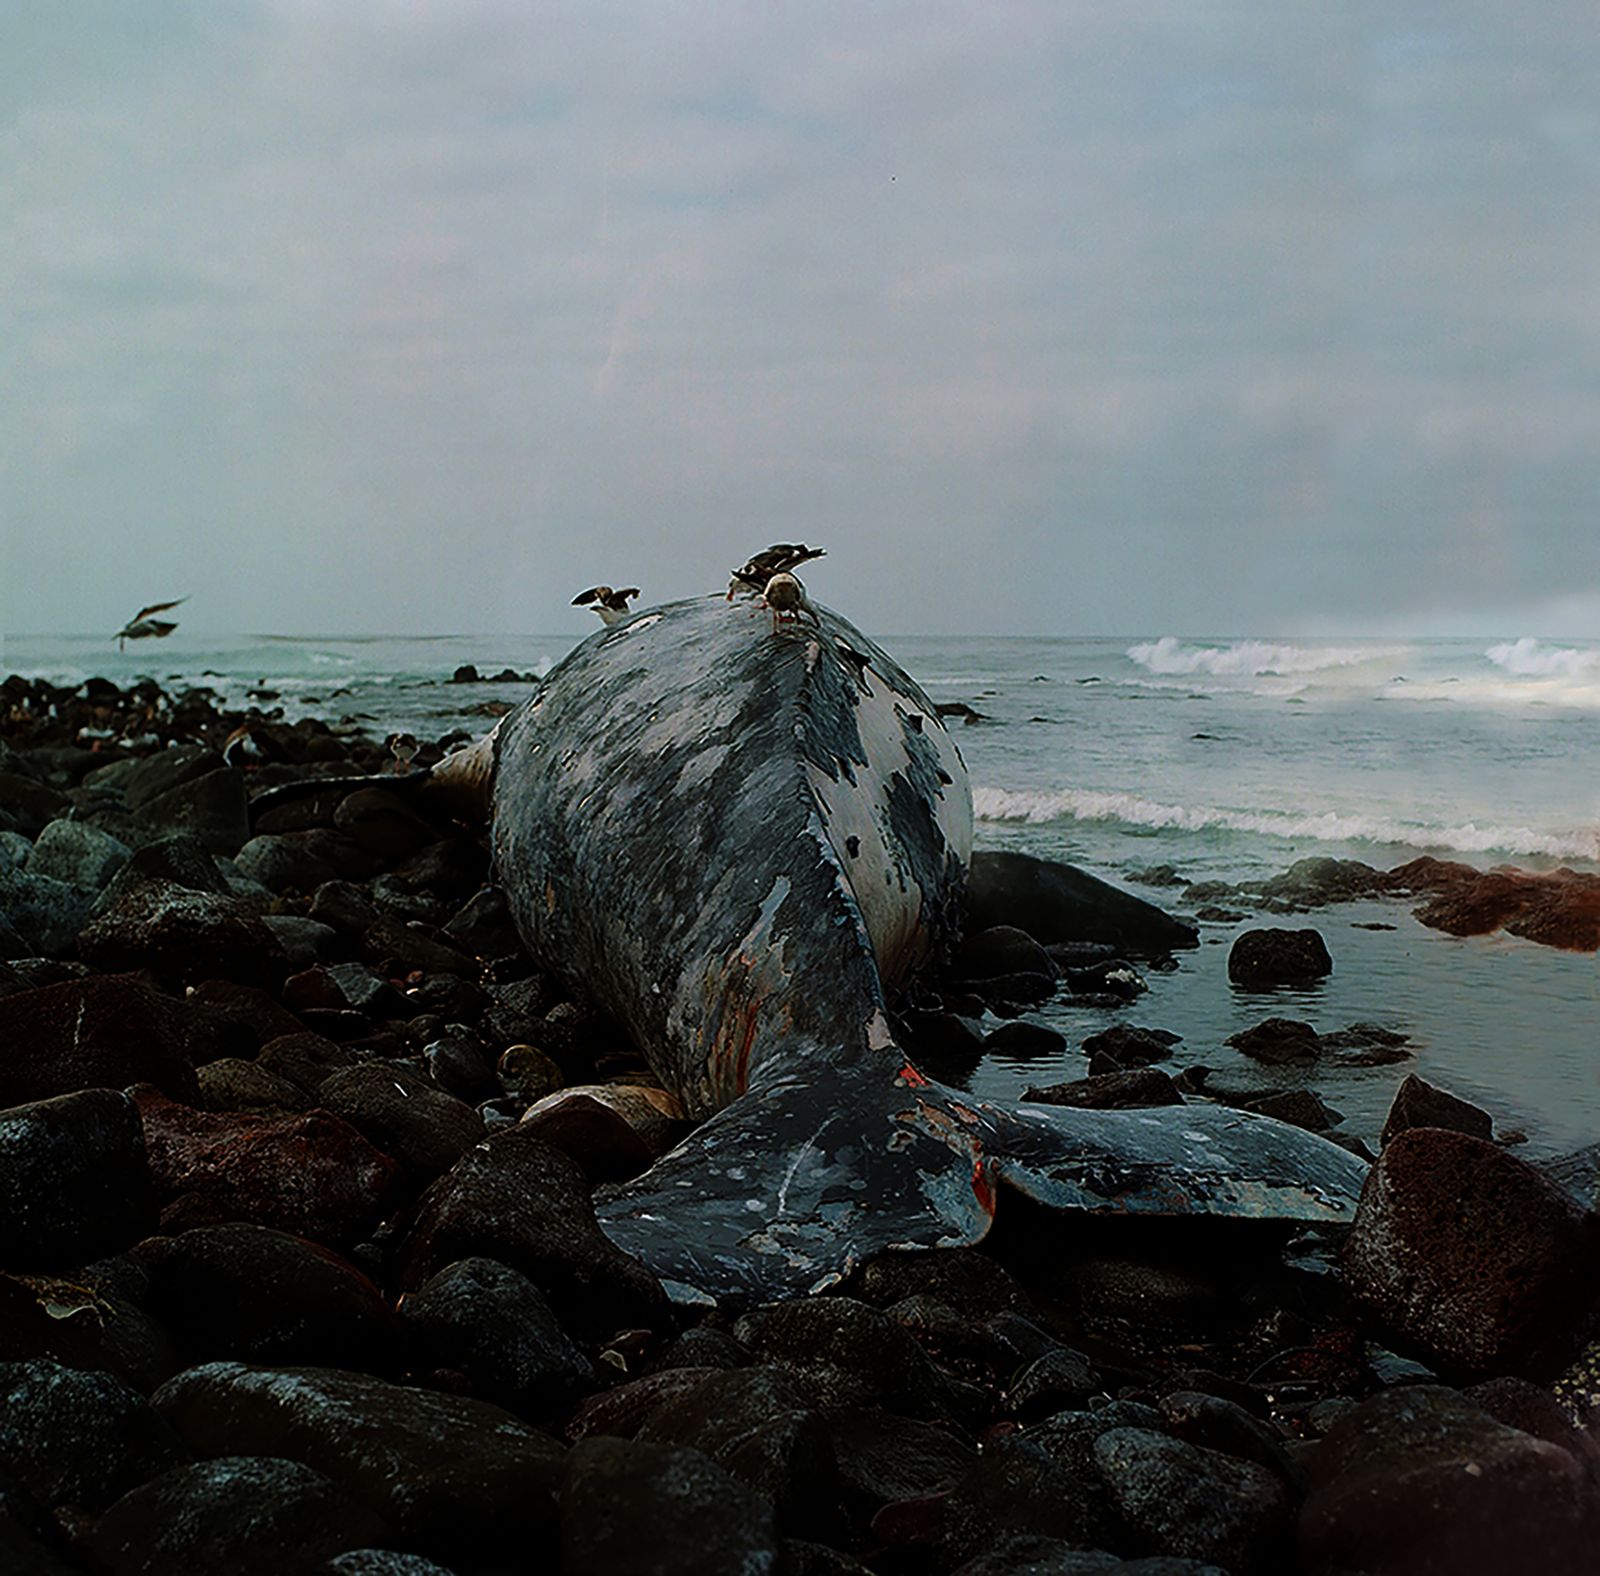 © Angélica Escoto - Image from the "They go stranded" photography project